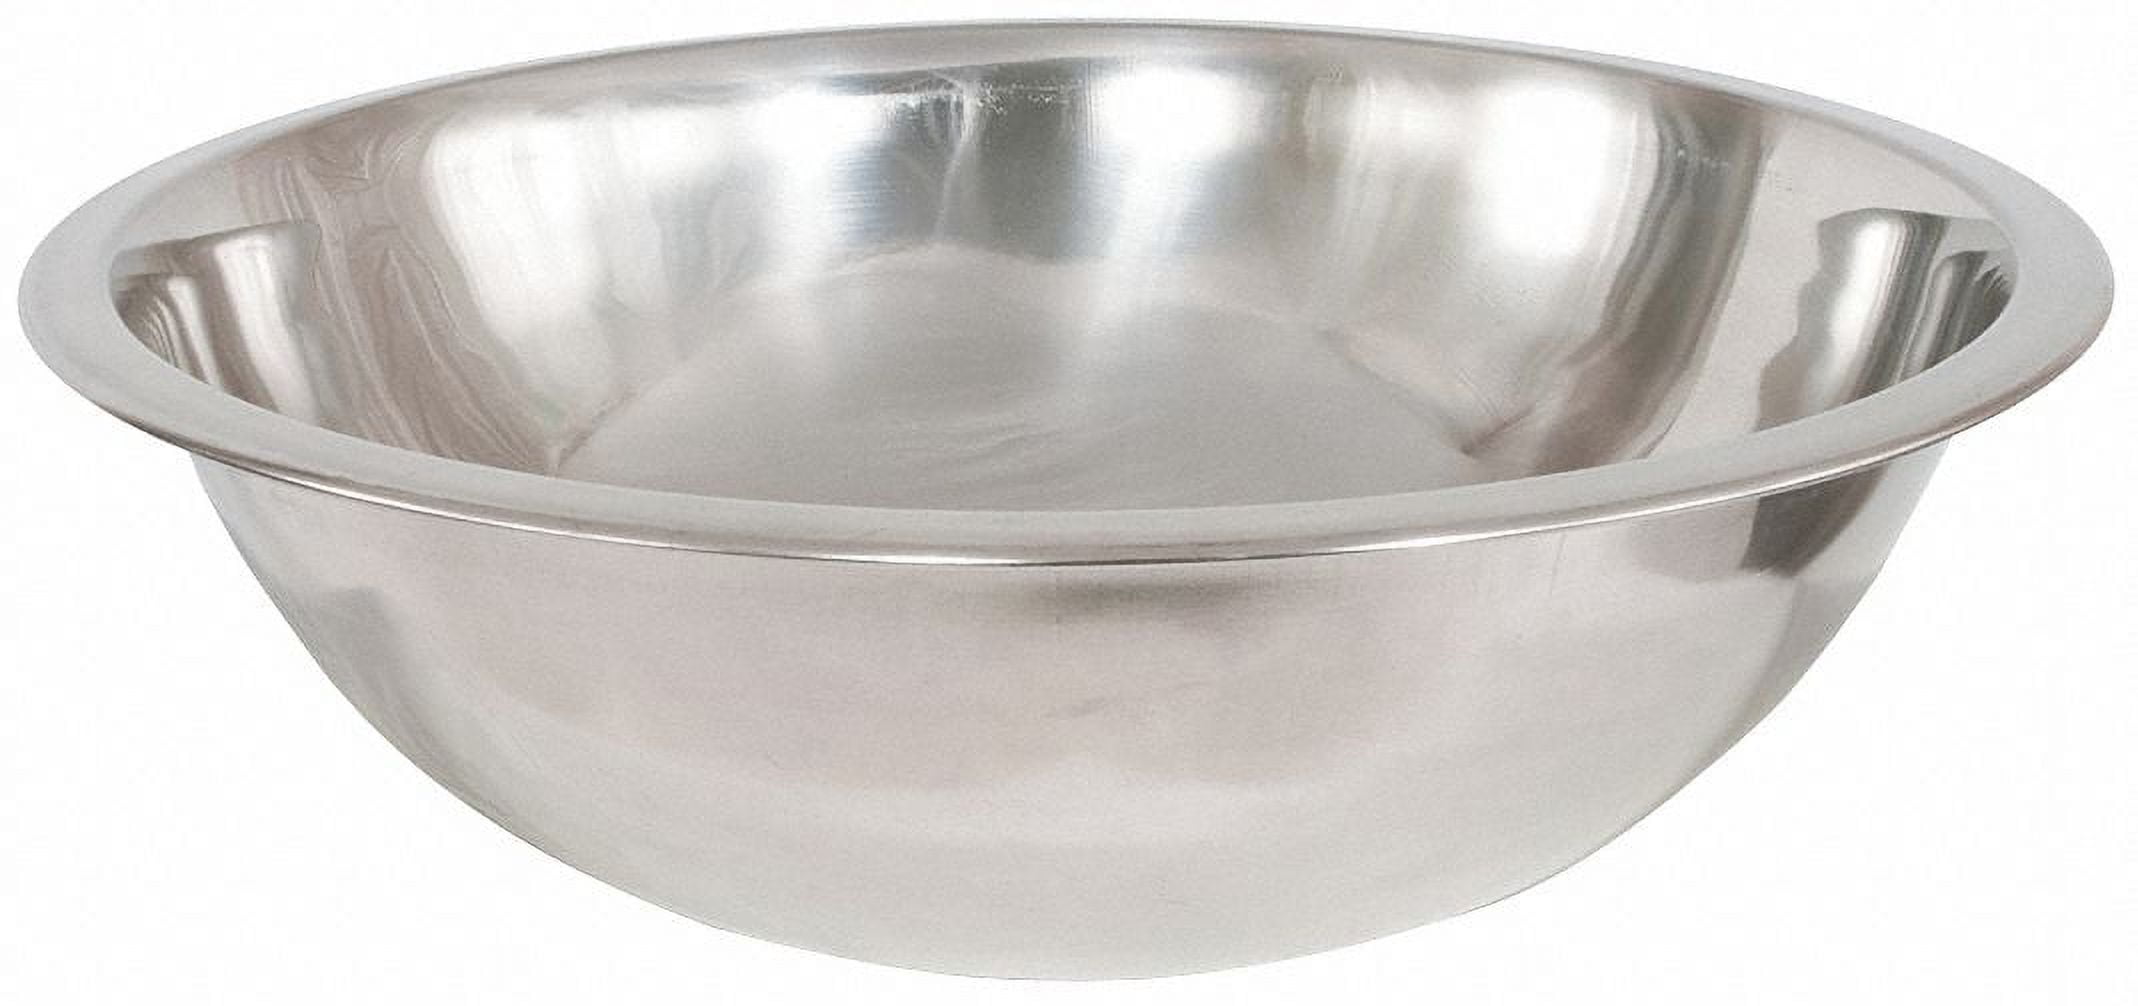 Stainless Steel 5-Quart Bowl + Reviews